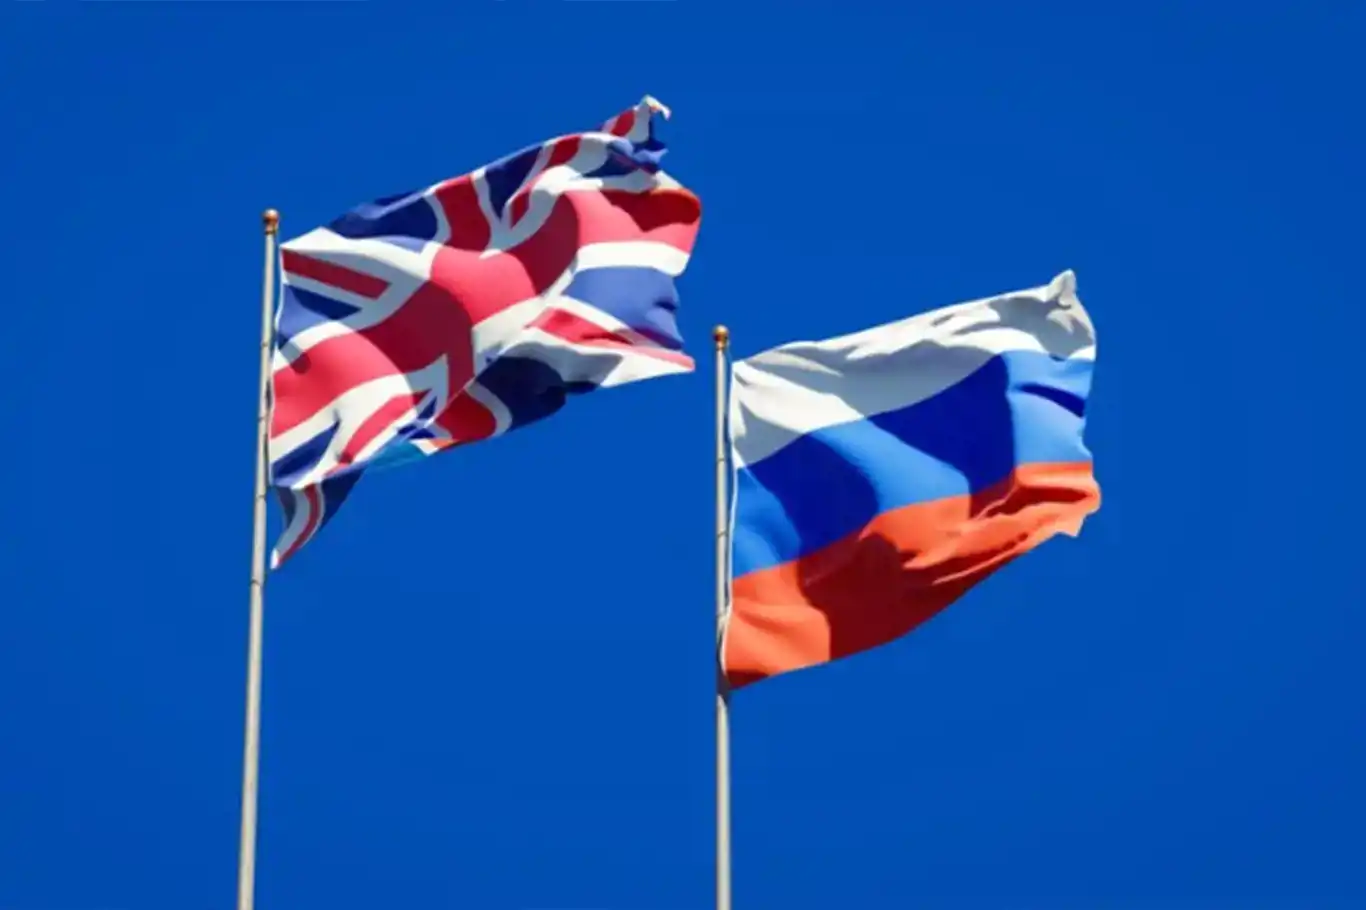 Moscow retaliates against UK sanctions, adds 23 British nationals to entry ban list